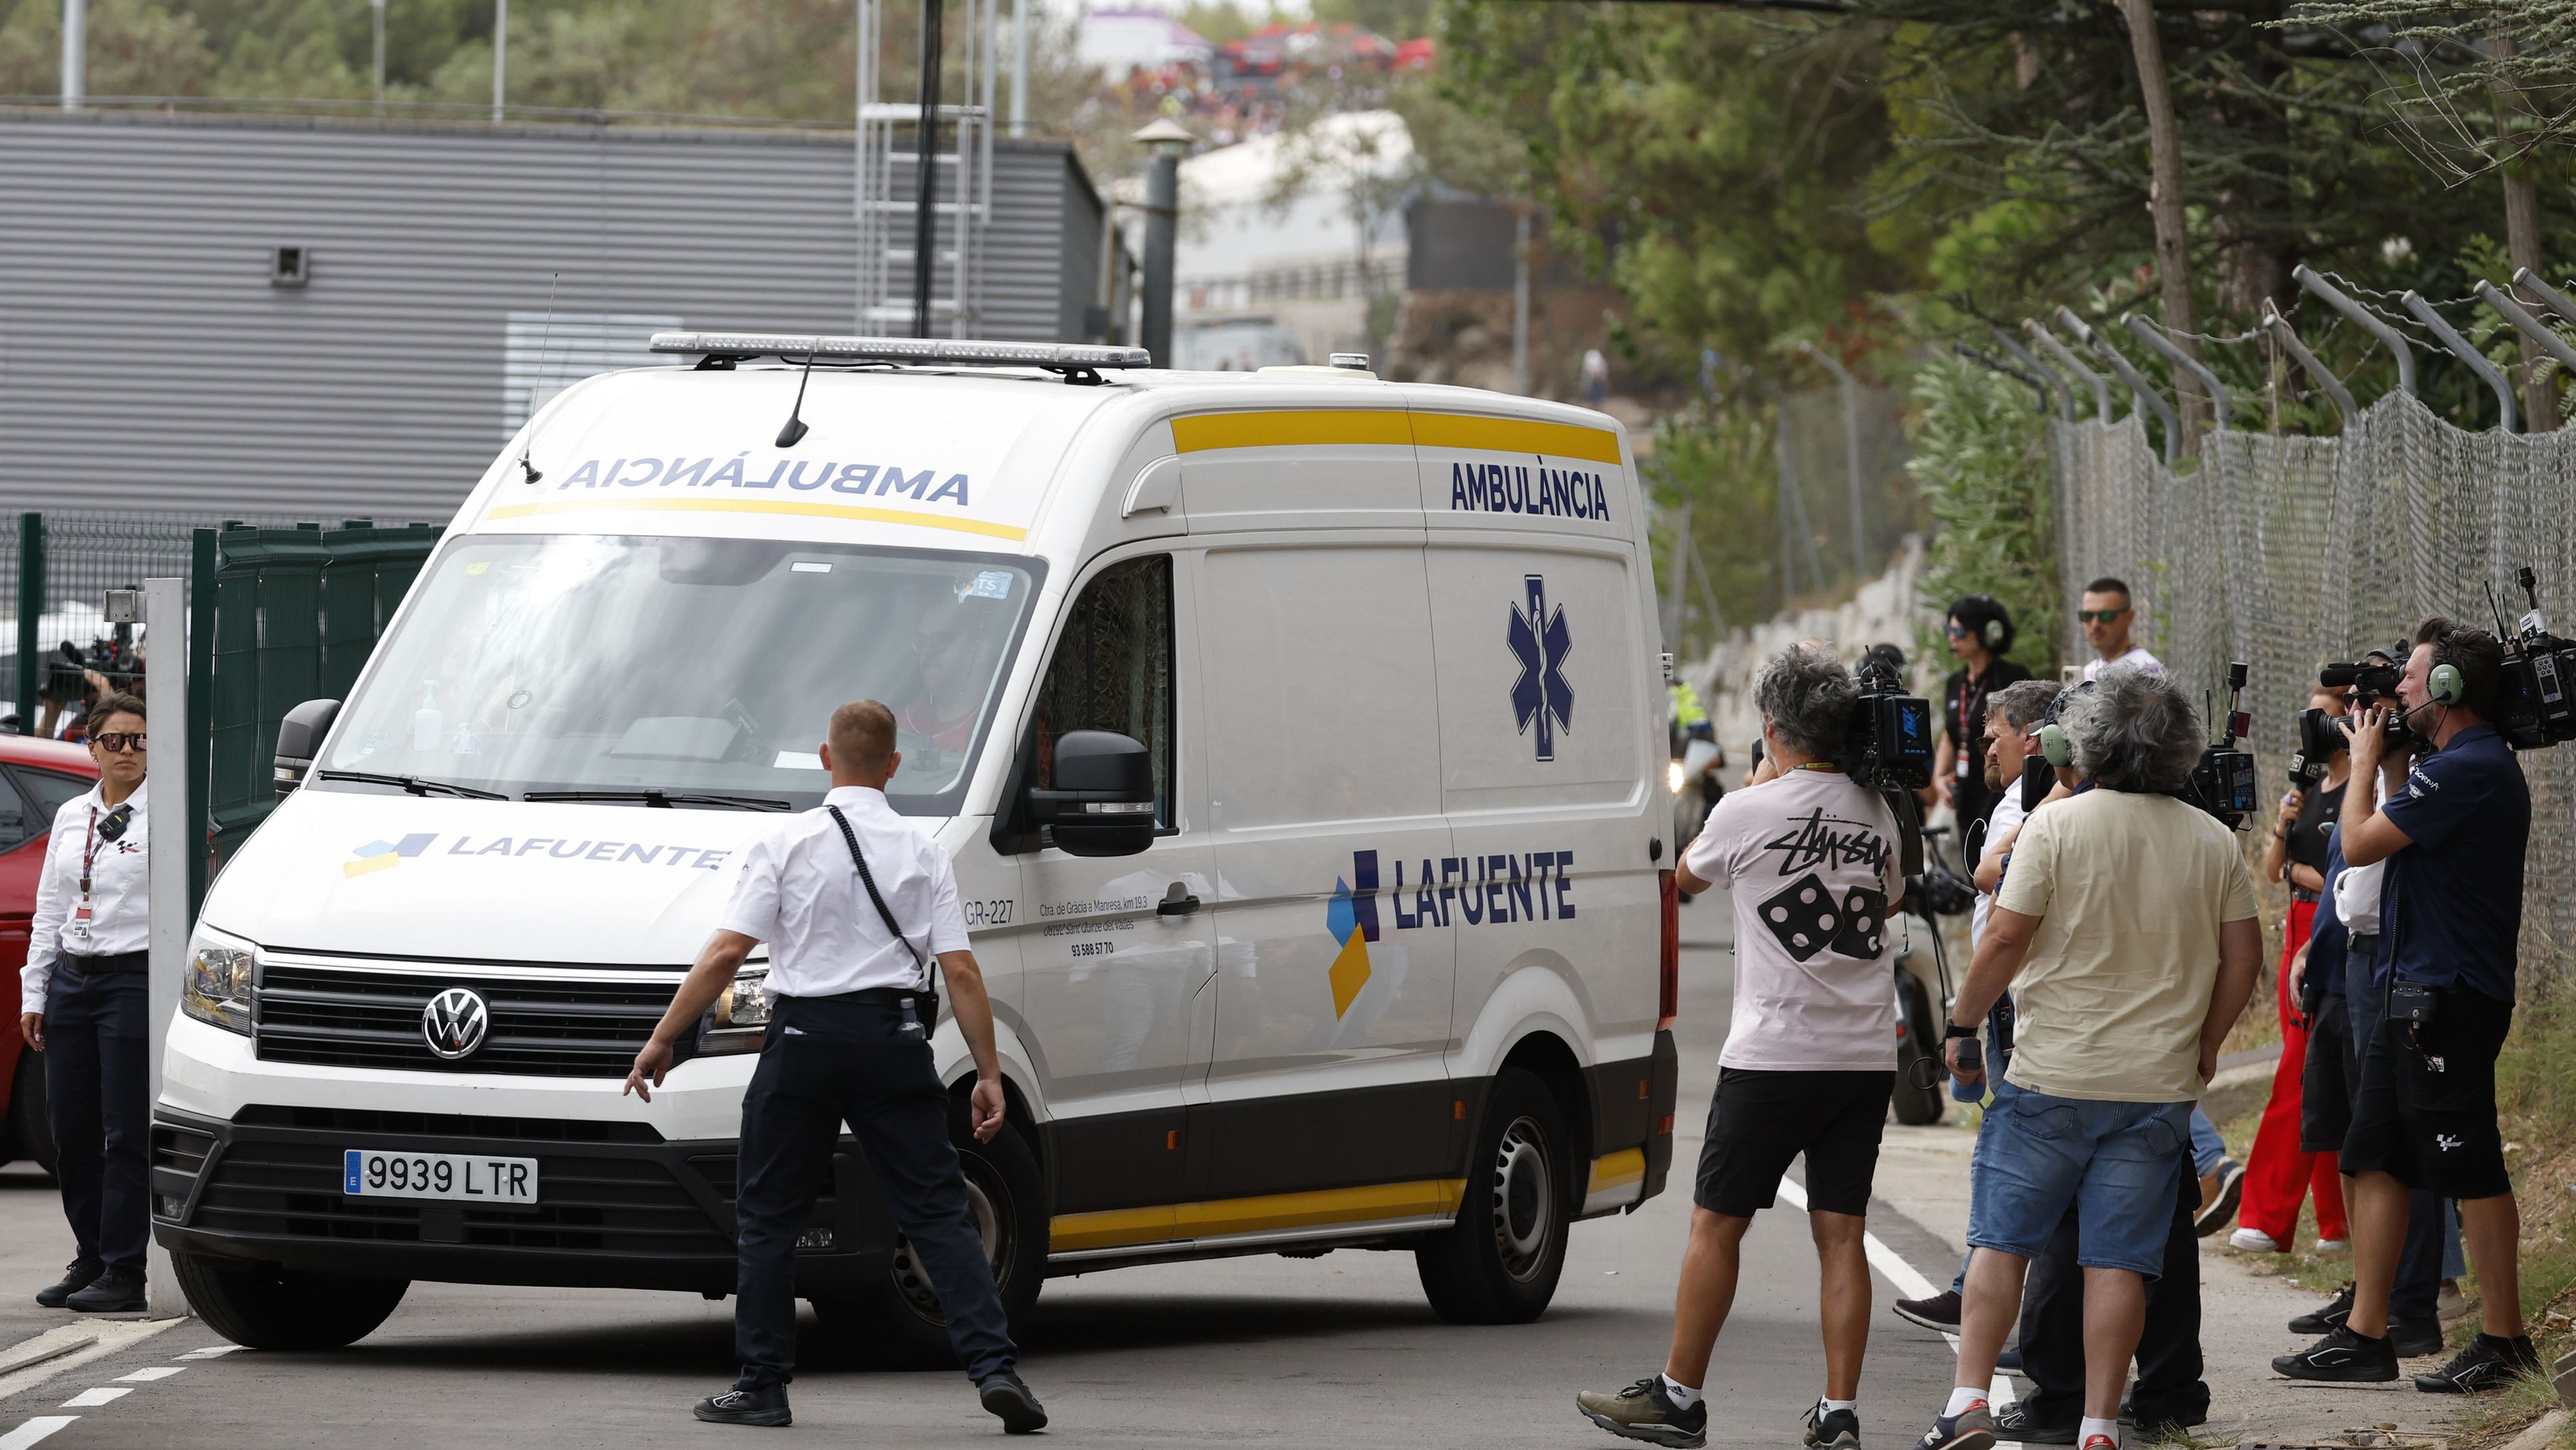 An ambulance carrying Francesco Bagnaia arrives at the medical center after he was involved in a crash during the first lap of the race of the MotoGP Grand Prix at the Catalunya.